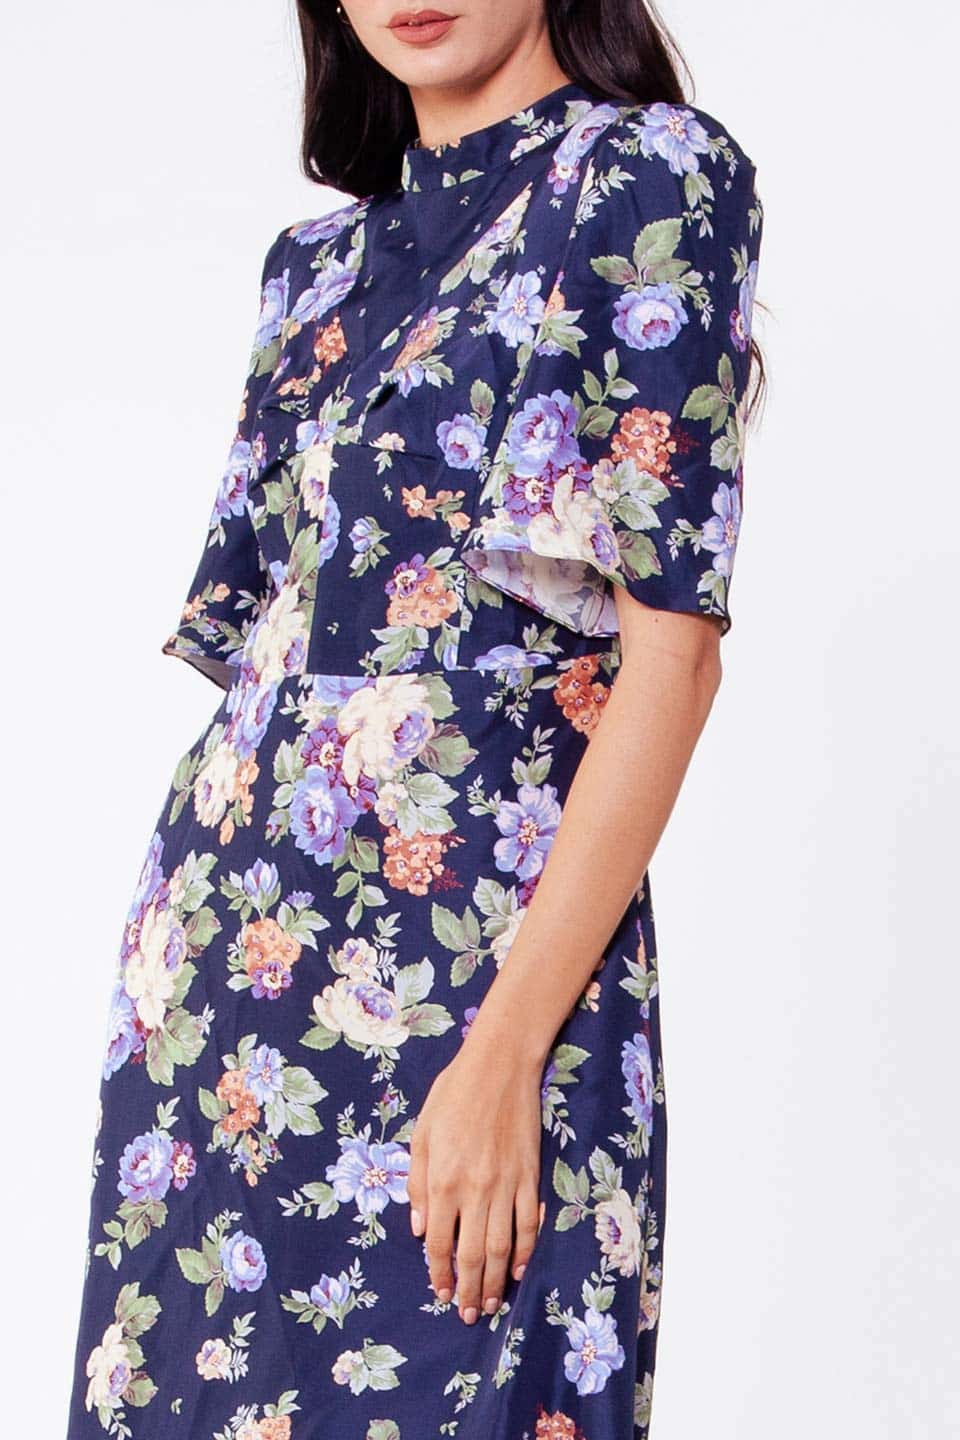 Midi dress from fashion designer Vilshenko, in blue color with floral print. online product detail view